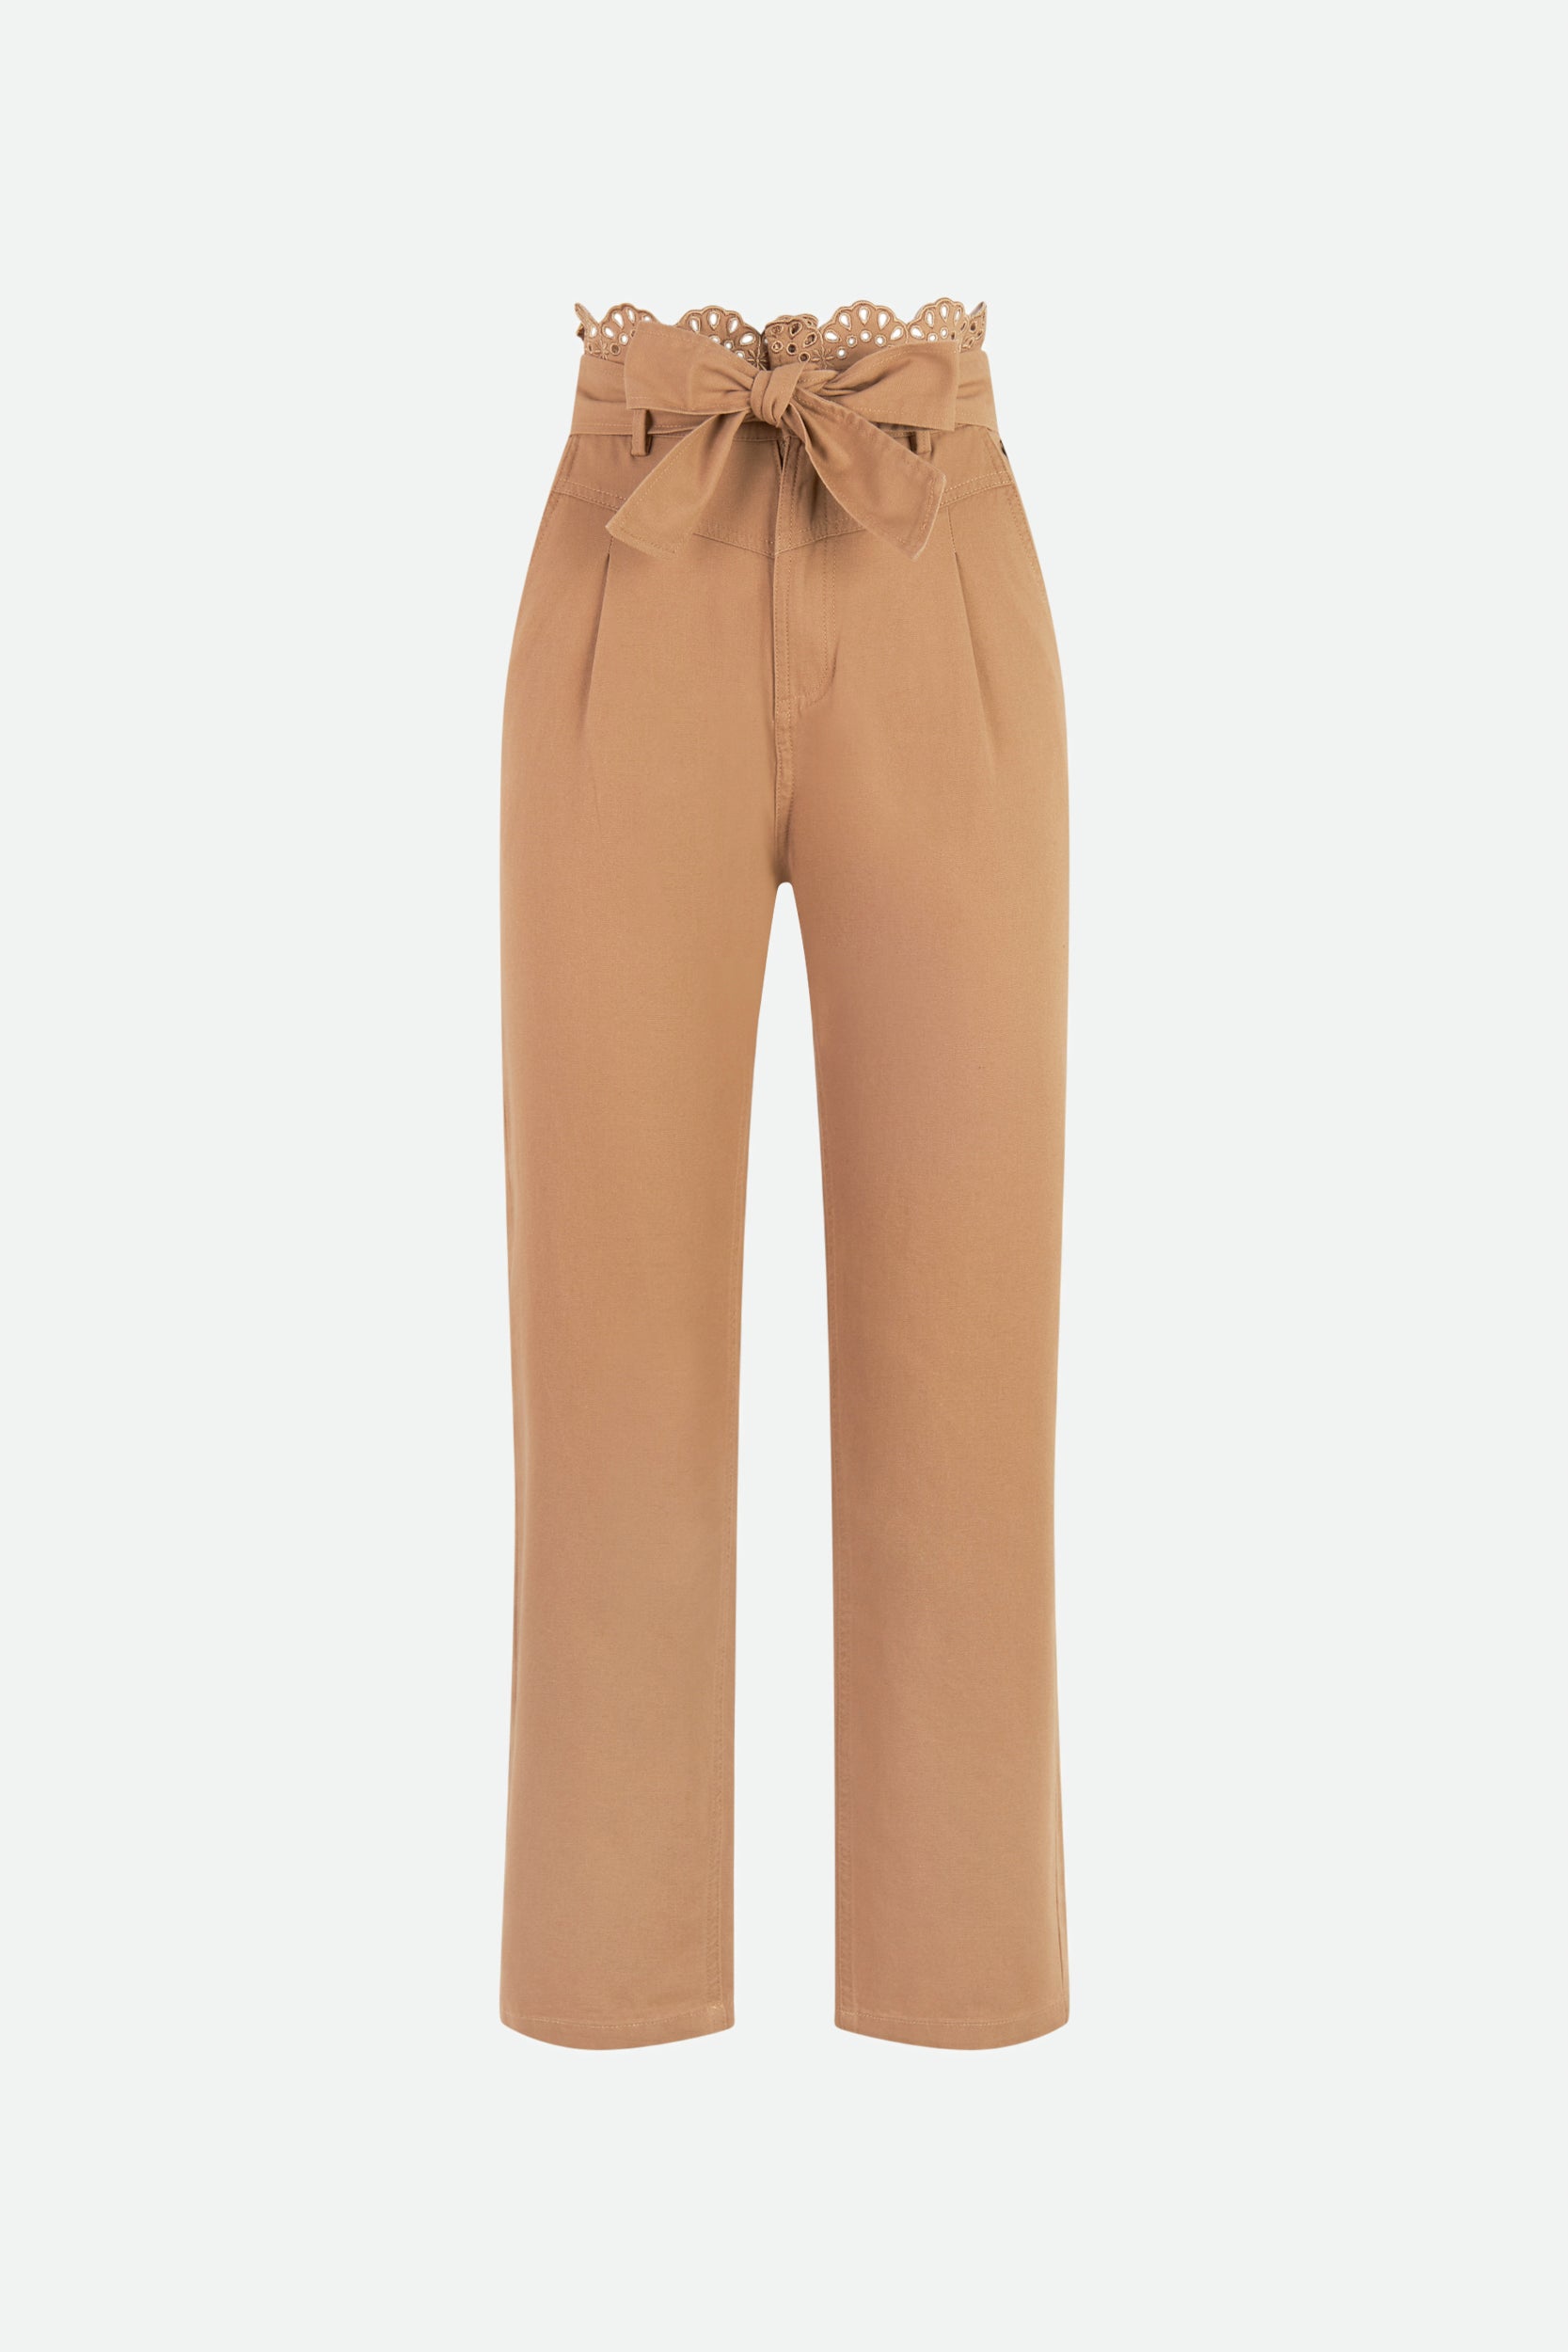 Twinset Beige Canvas Trousers